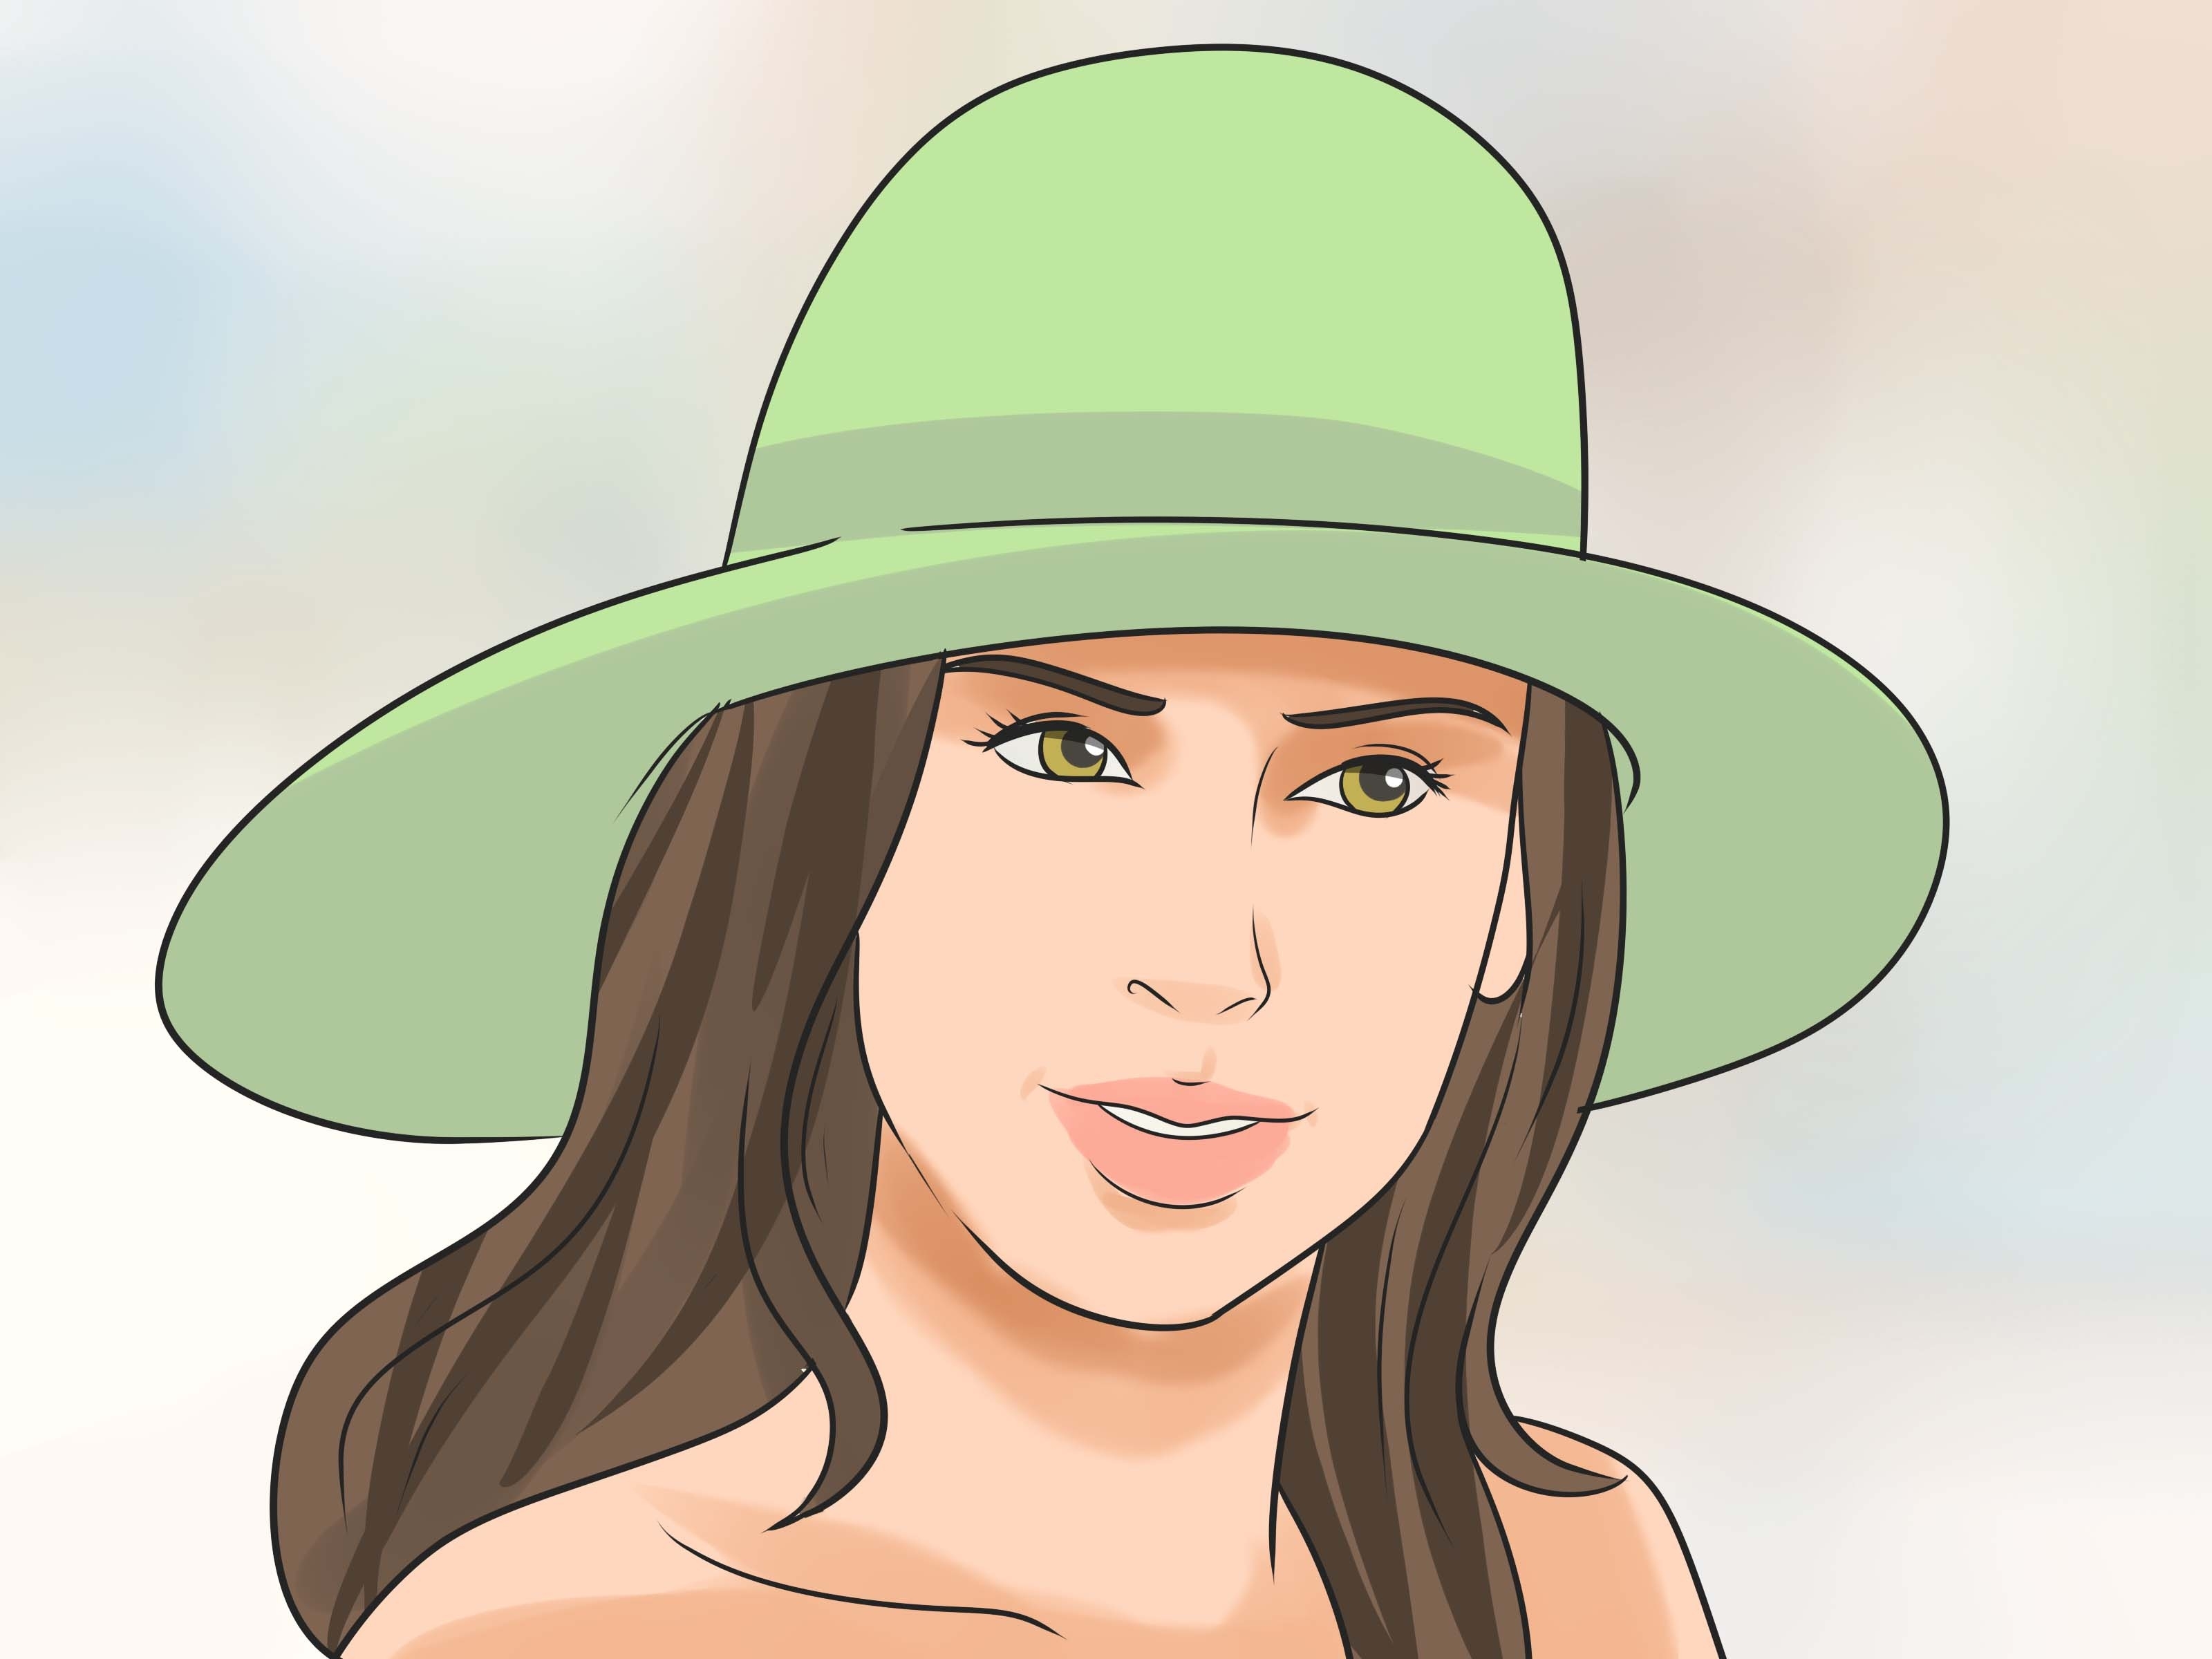 How To Make Hazel Eyes Pop: 10 Steps (With Pictures) - Wikihow pertaining to Eye Makeup Tips For Hazel Eyes And Blonde Hair